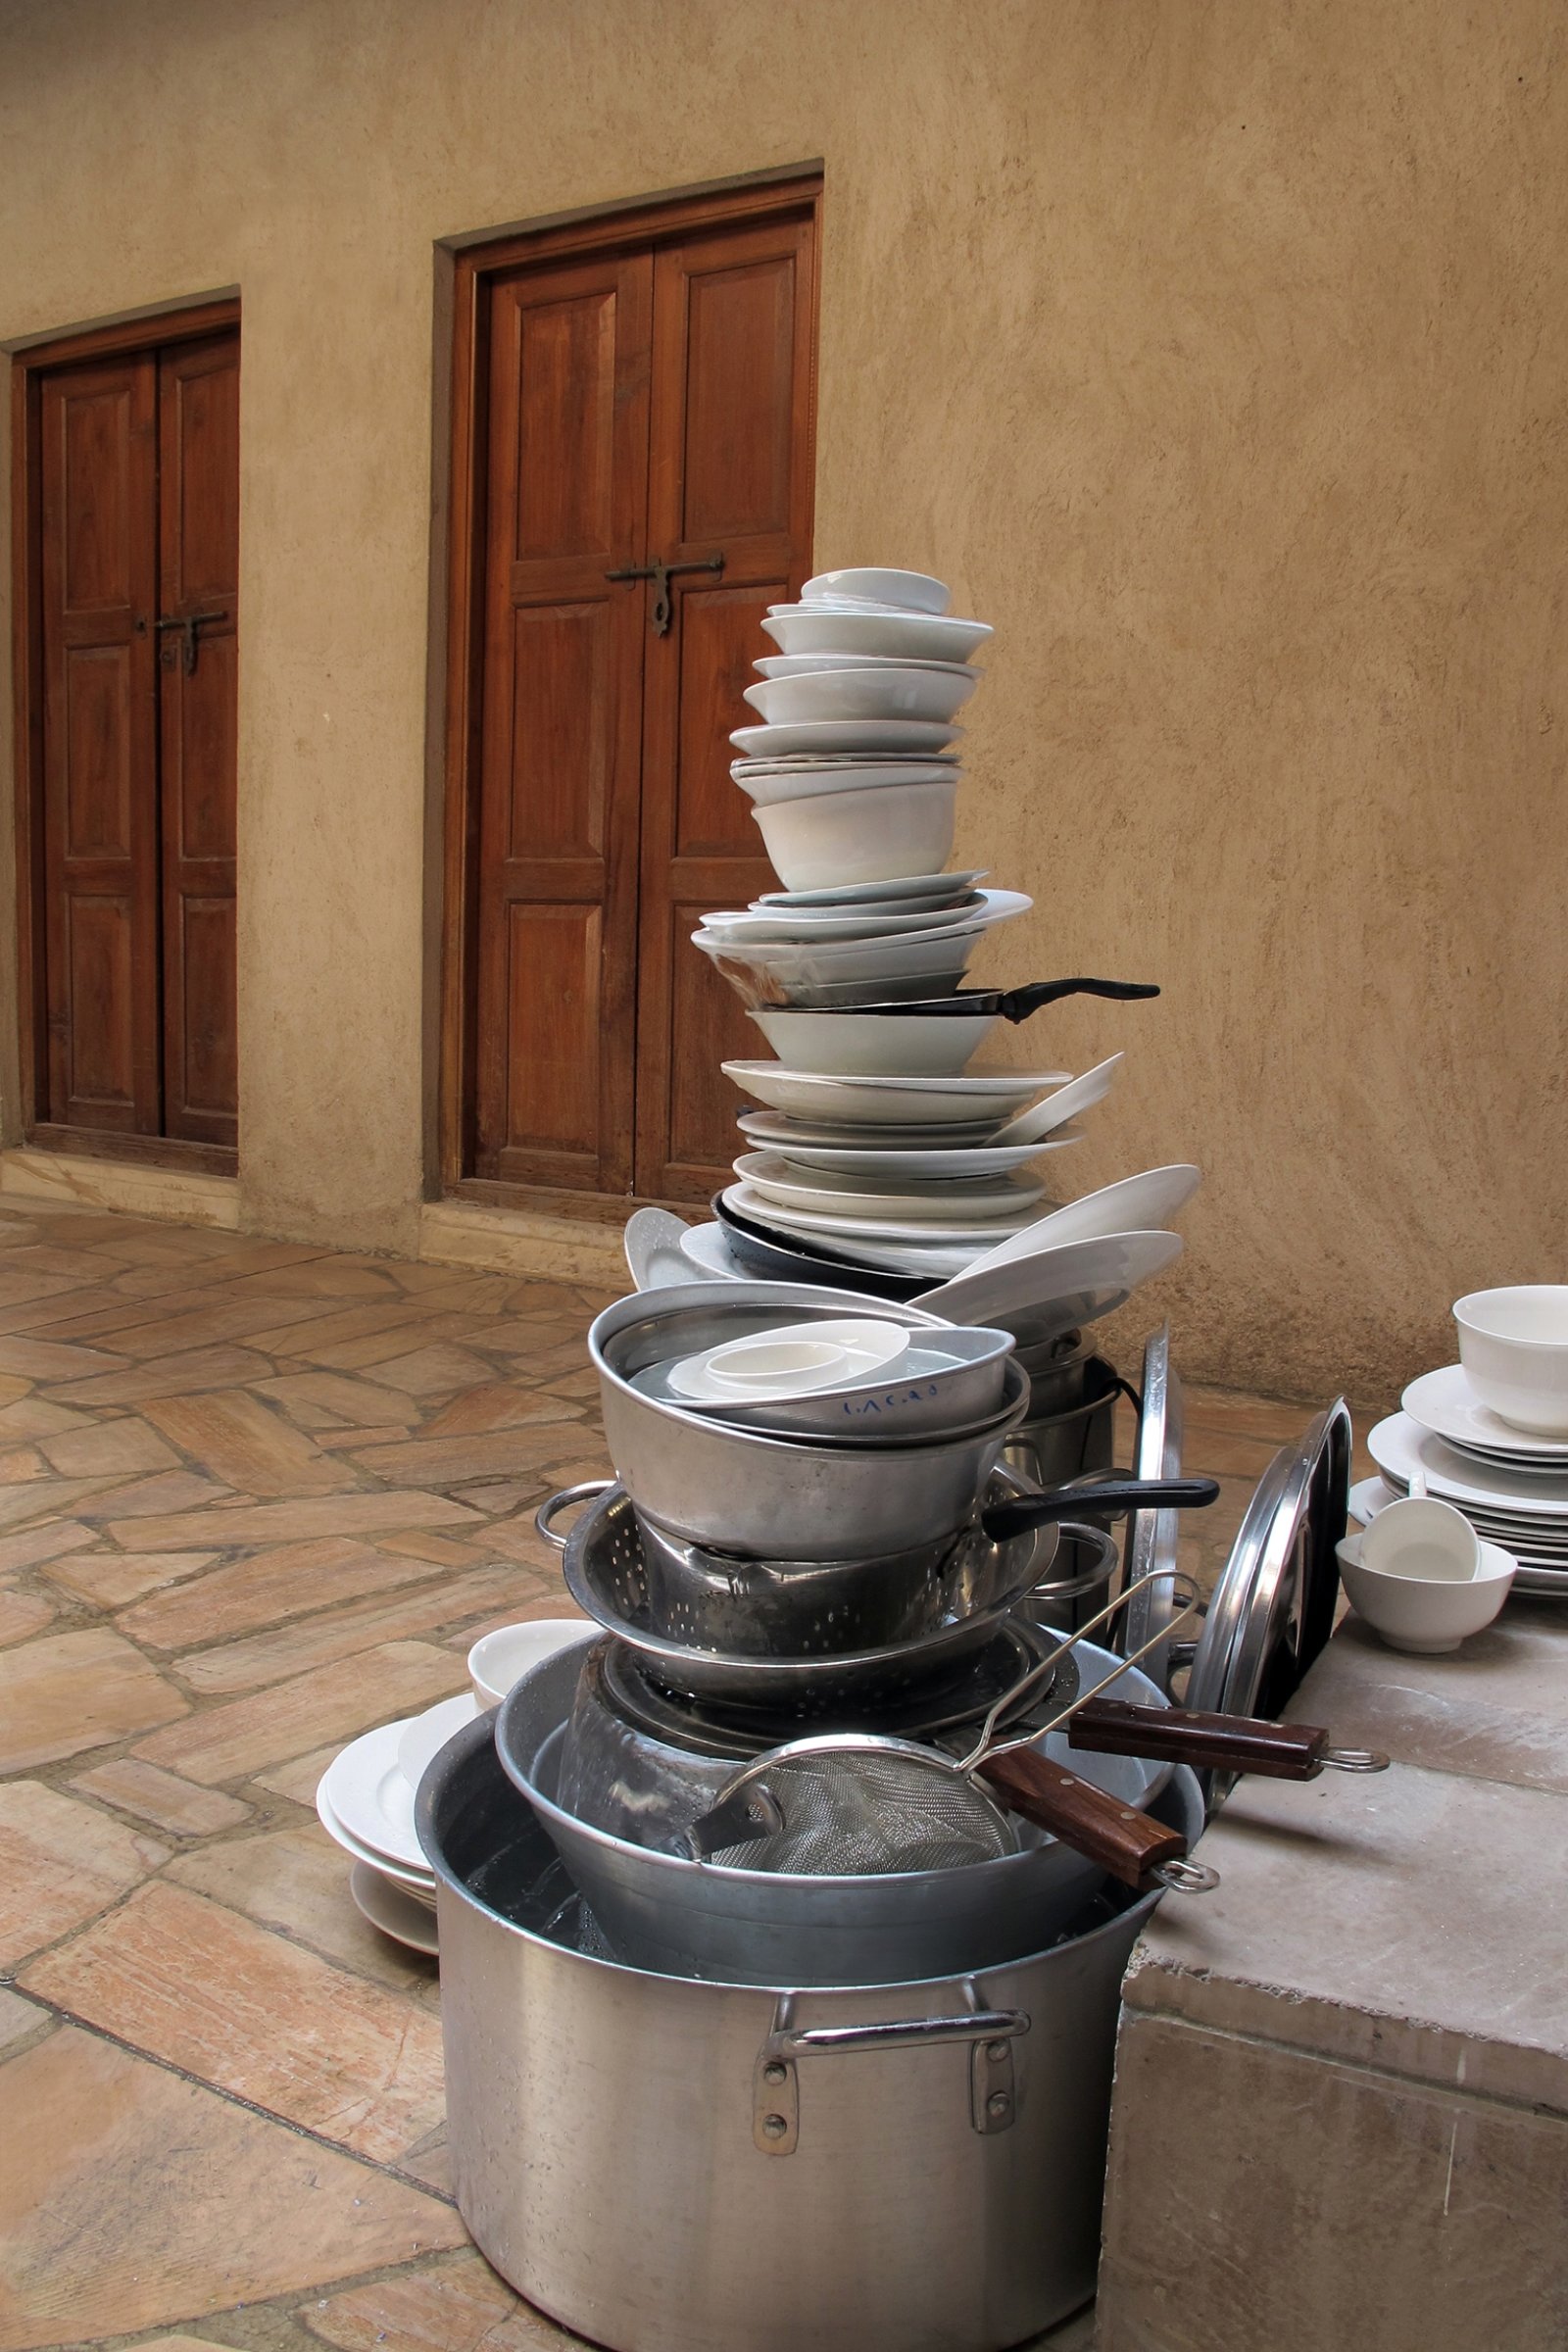 Abbas Akhavan, Variations on Ghosts and Guests: Well, 2011, various dishes, cookware, internal fountain system, water, dimensions variable. Installation view, Variations on Ghosts and Guests, Delfina Foundation, Dubai, UAE, 2011